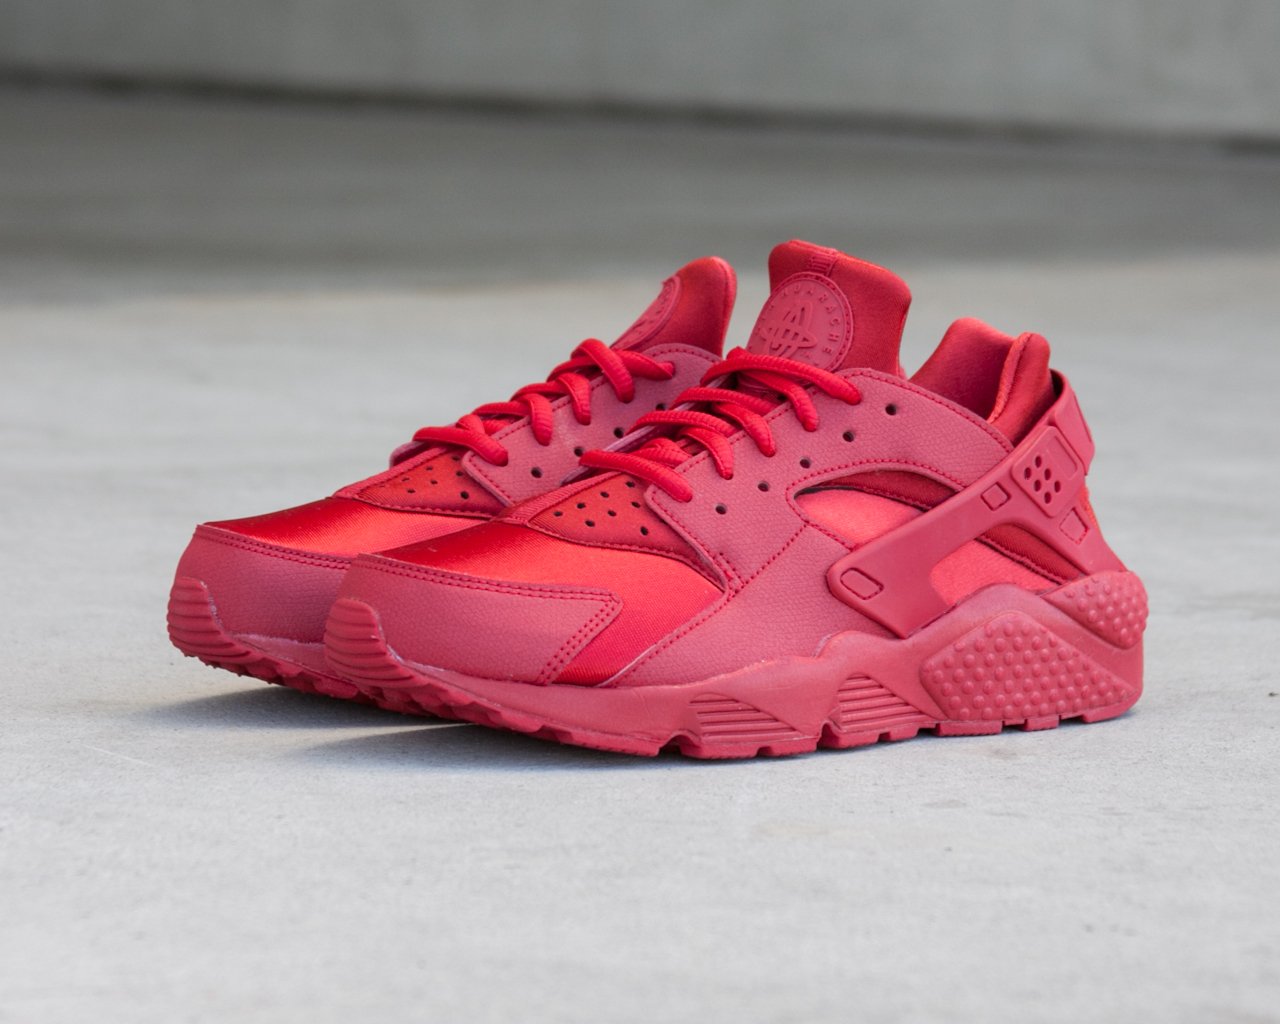 on Twitter: "These red Nike Huarache Run for the ladies will be in-store on Fri! Sorry, fellas. https://t.co/VIXc8NlA3B" / Twitter